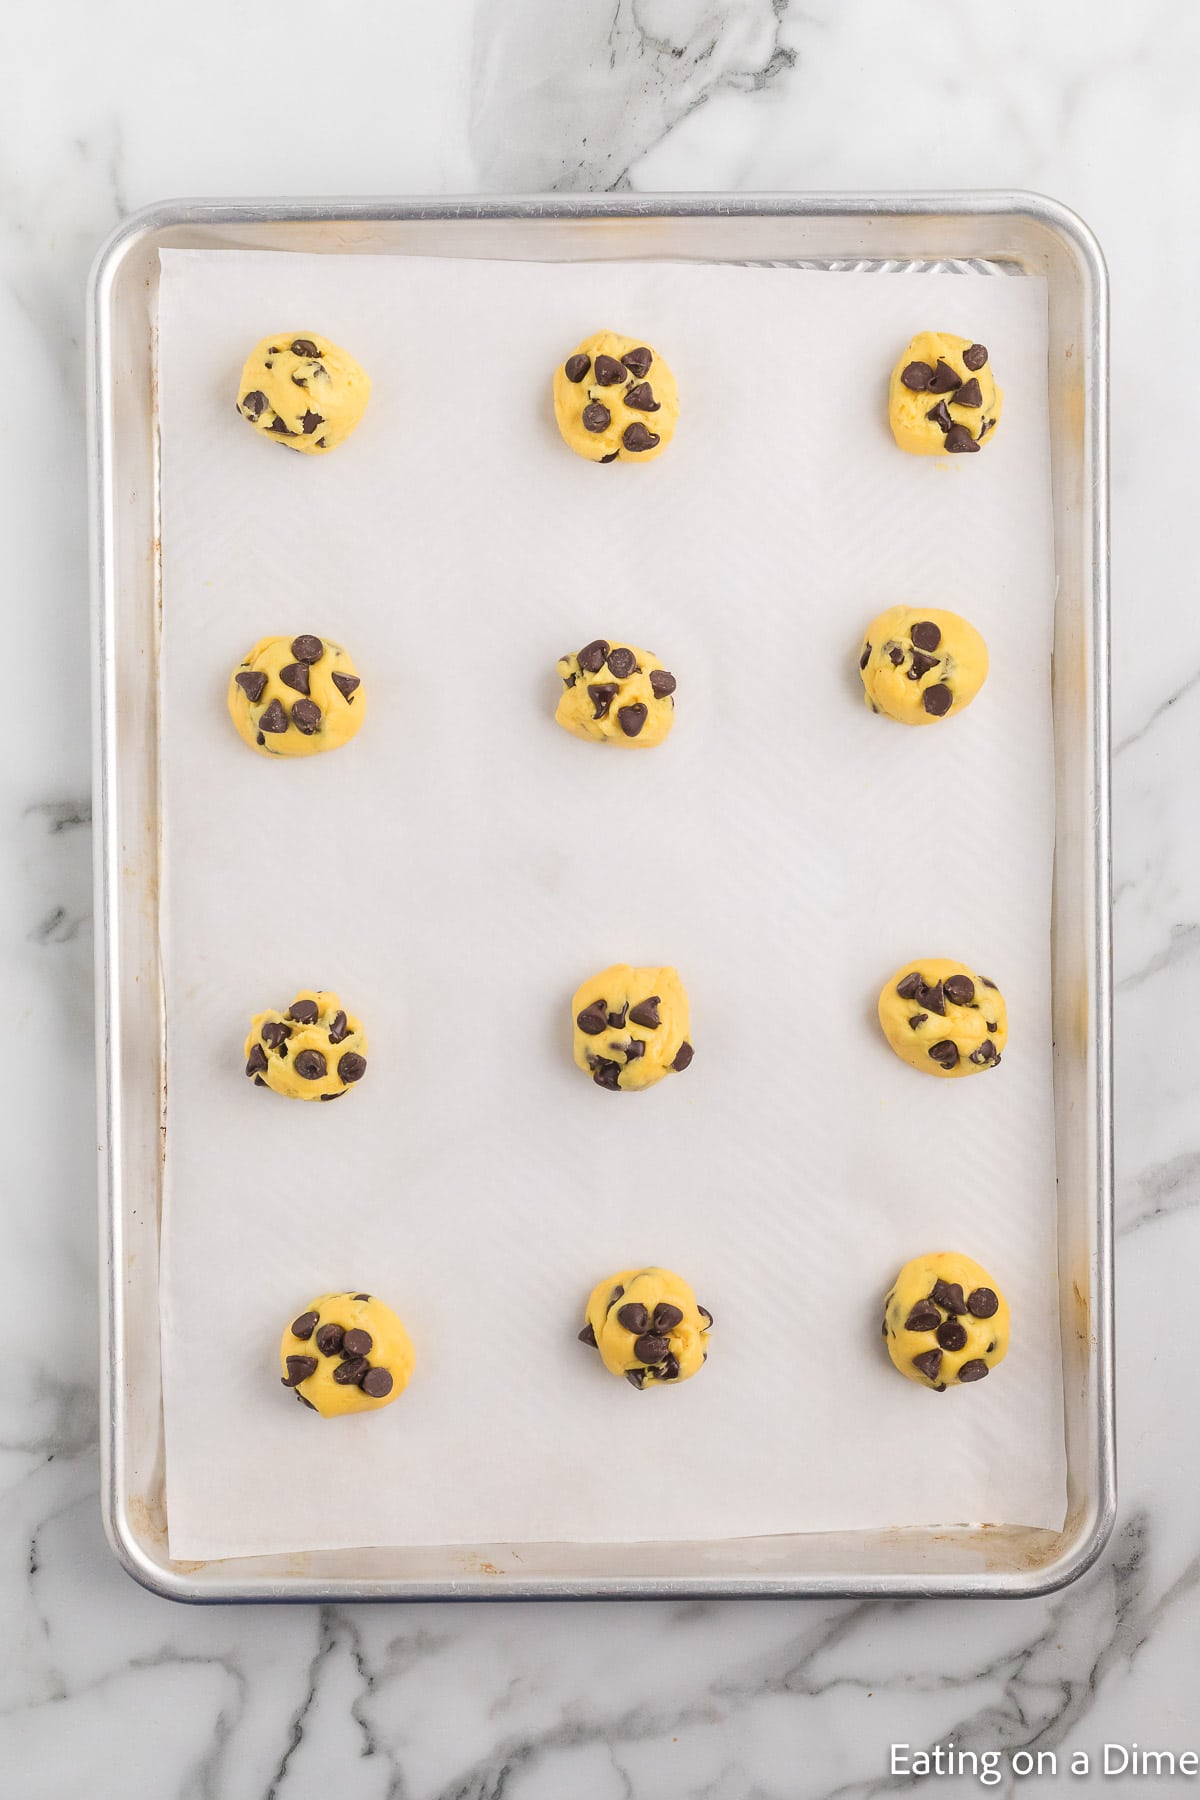 Placing the cookie dough on the baking sheet